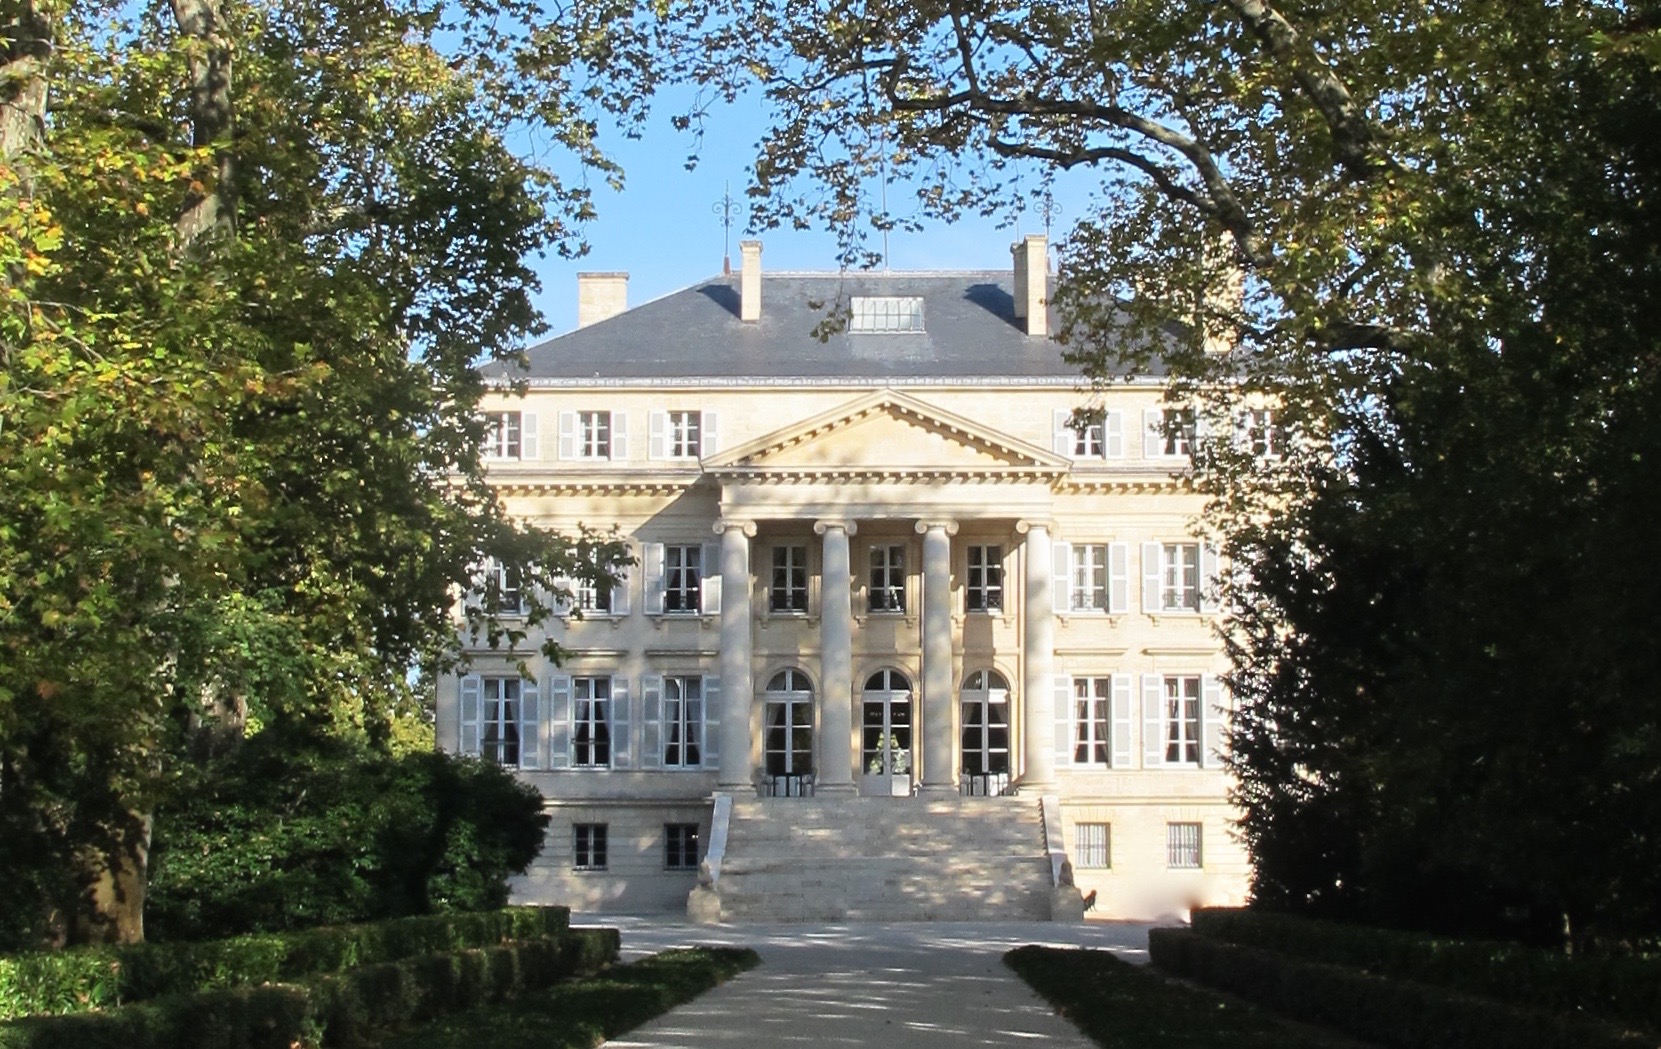 Chateau Margaux: The big winner and most highly rated wine of the 2015 Bordeaux vintage.